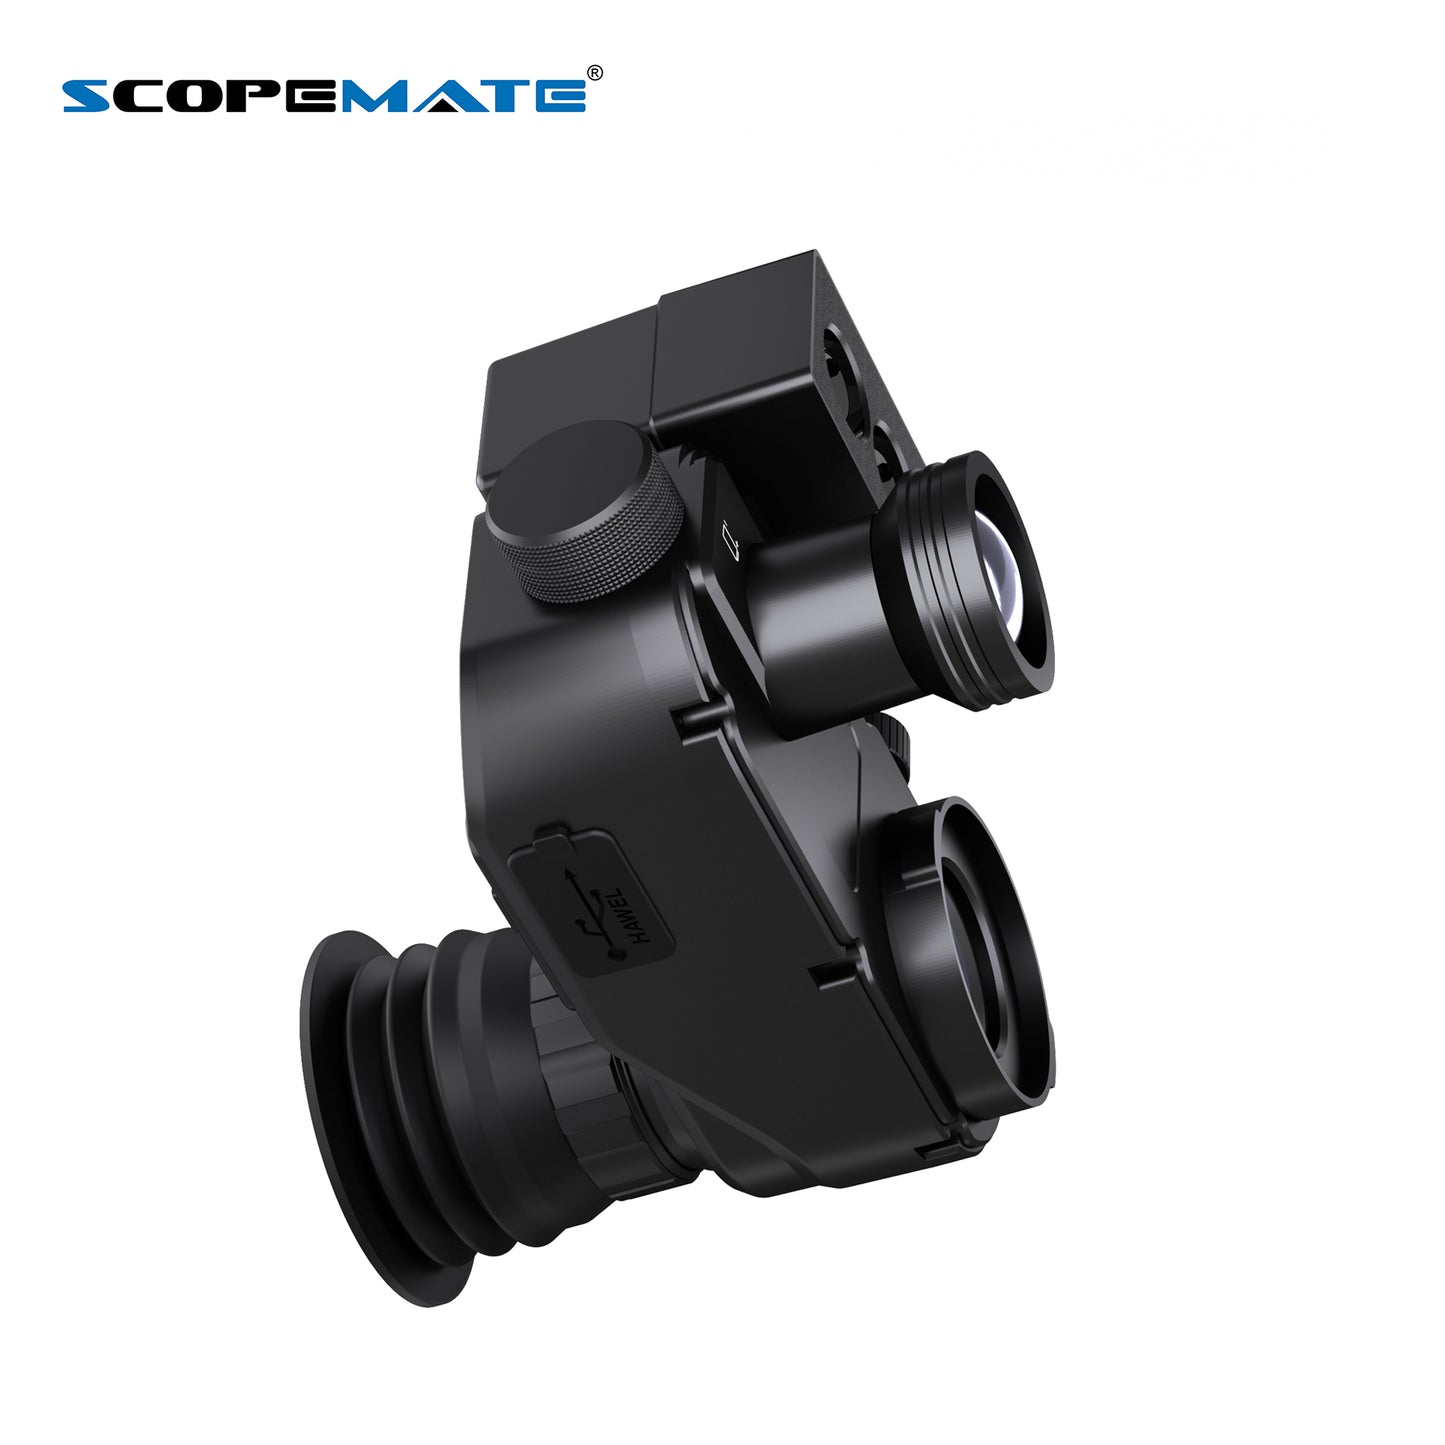 Scopemate Day and Night Vision Scope Camera Build-in Range Finder NVS12 LRF